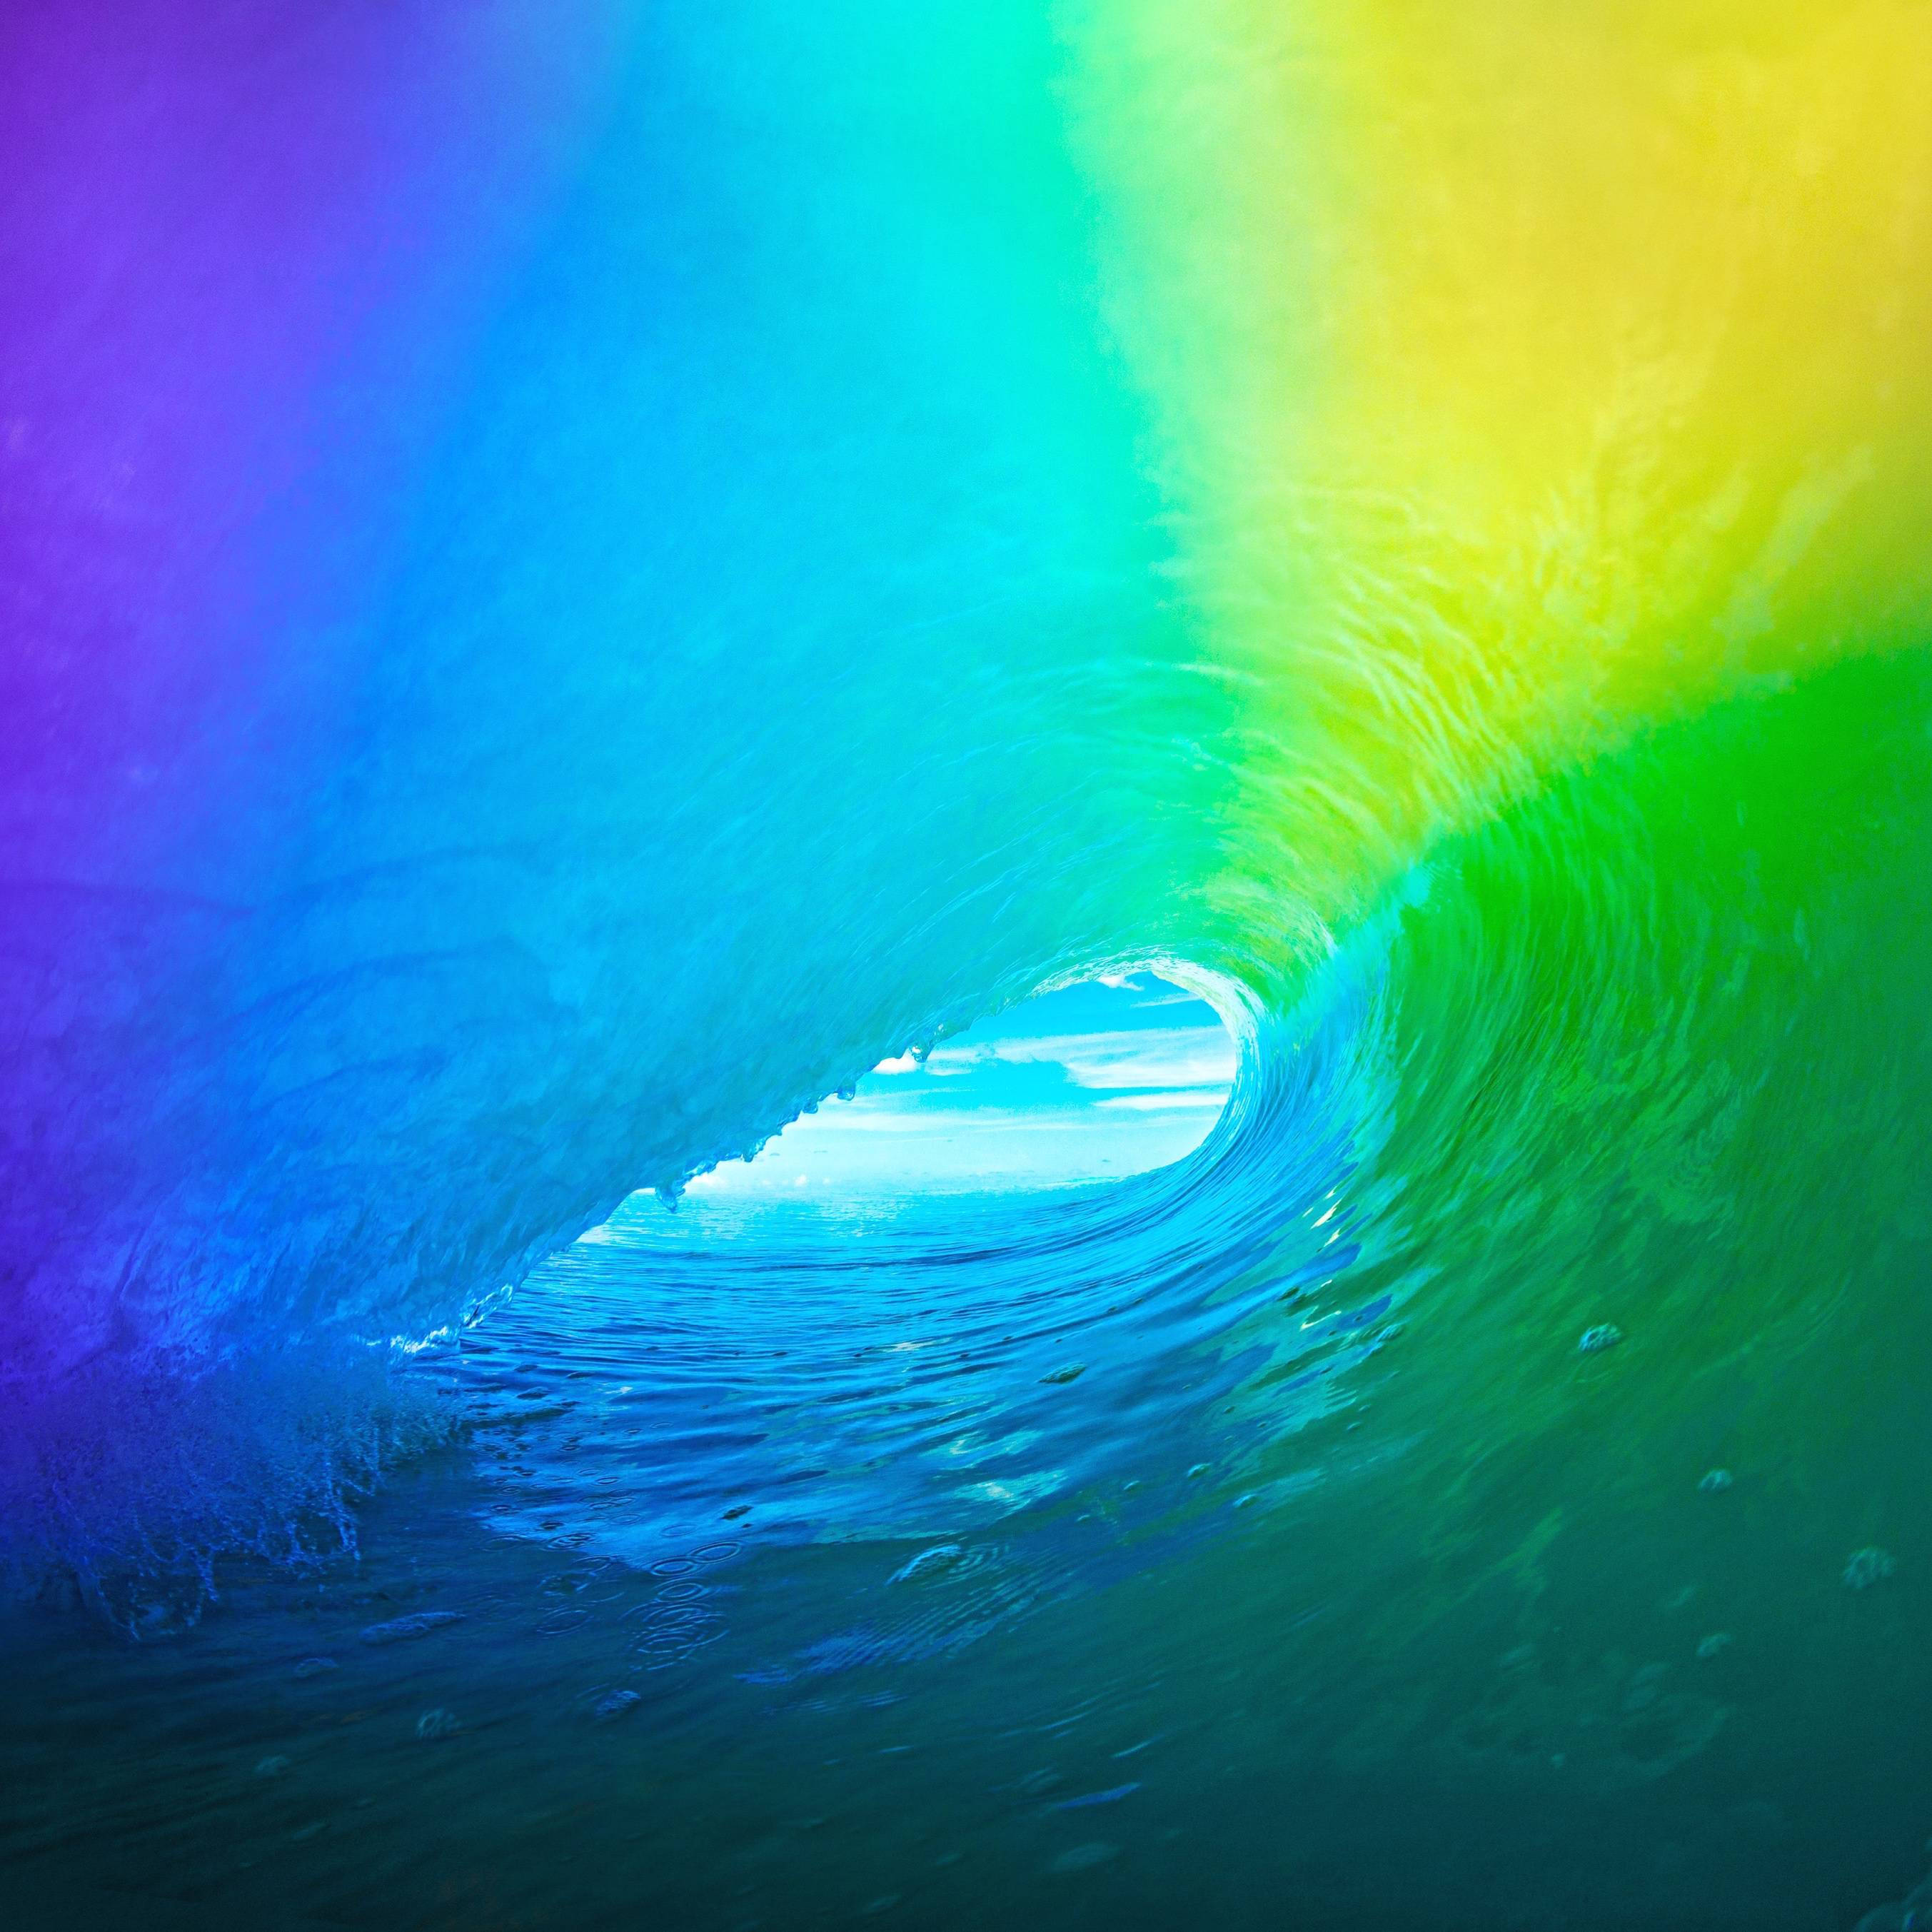 Fascinating Waves As Official Ipad Theme Wallpaper